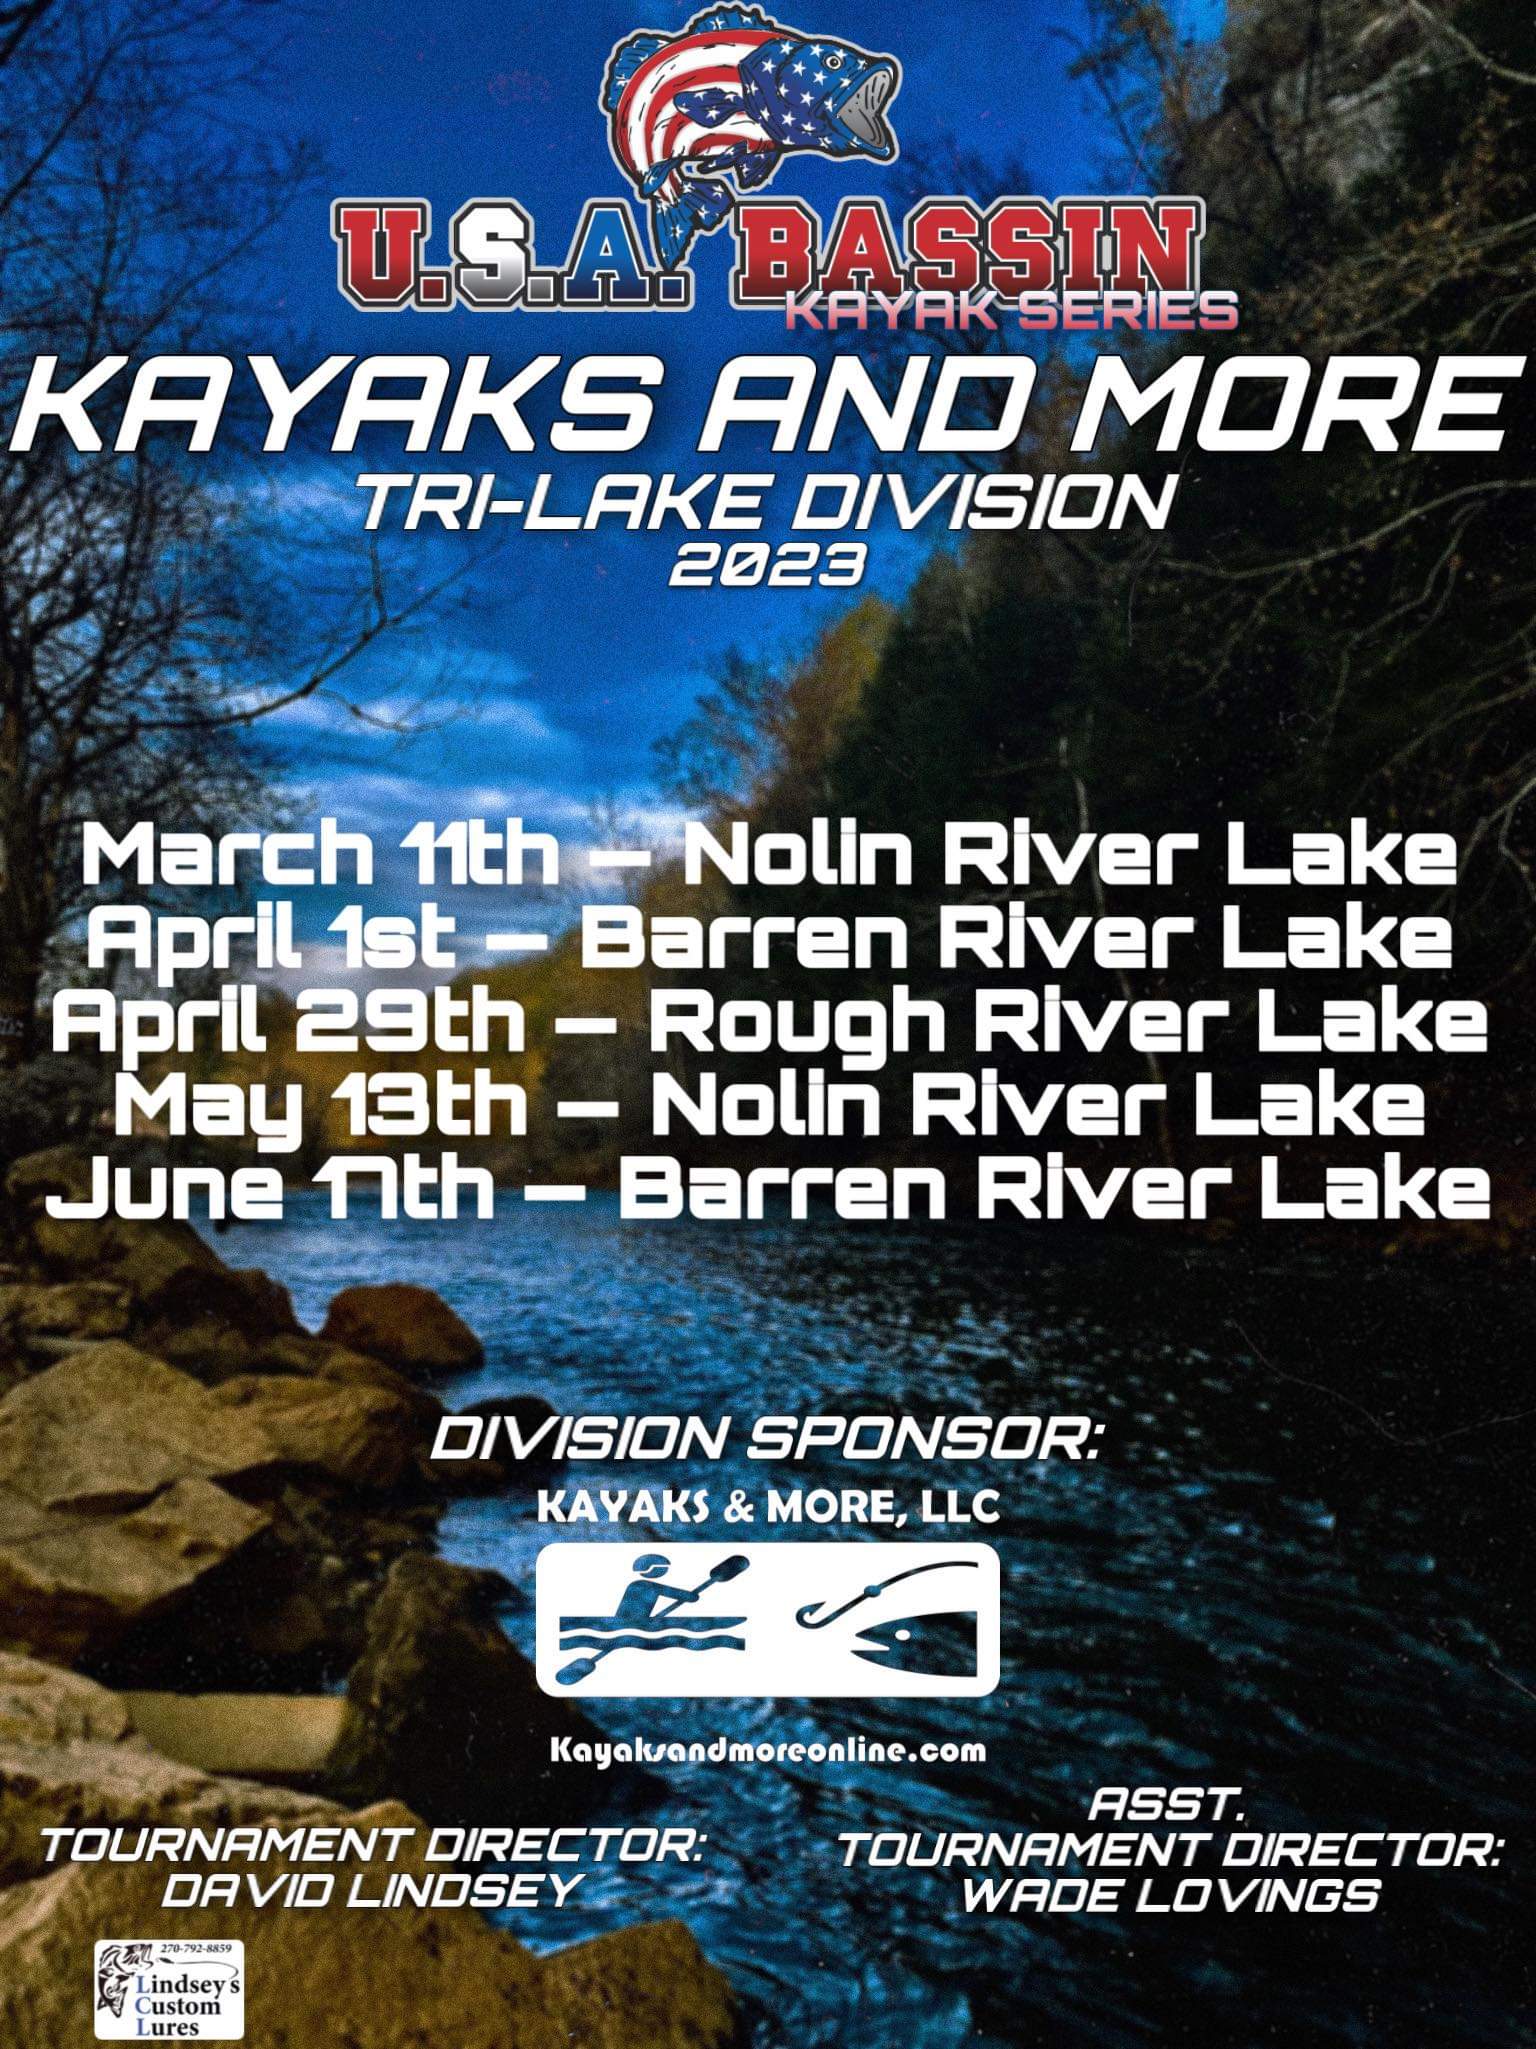 The 2023 schedule for USA Bassin Kayak Series